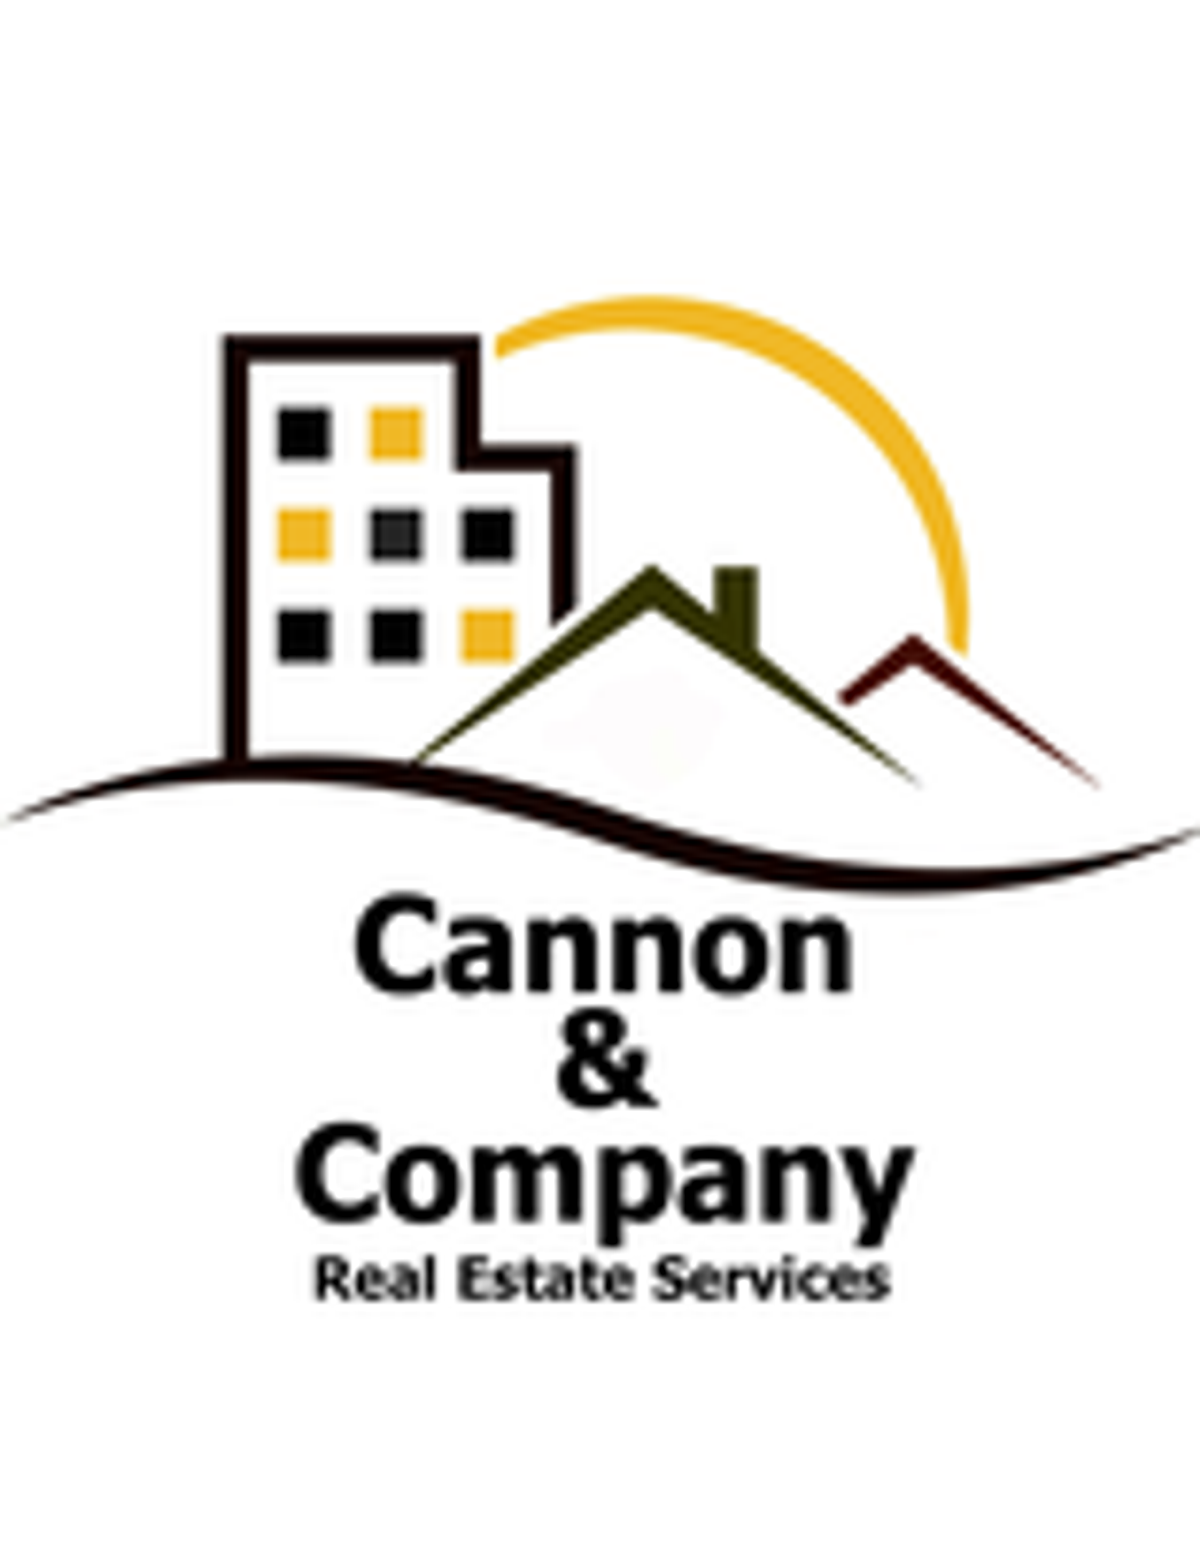 Photo for Mark Feigh, Listing Agent at Cannon & Company